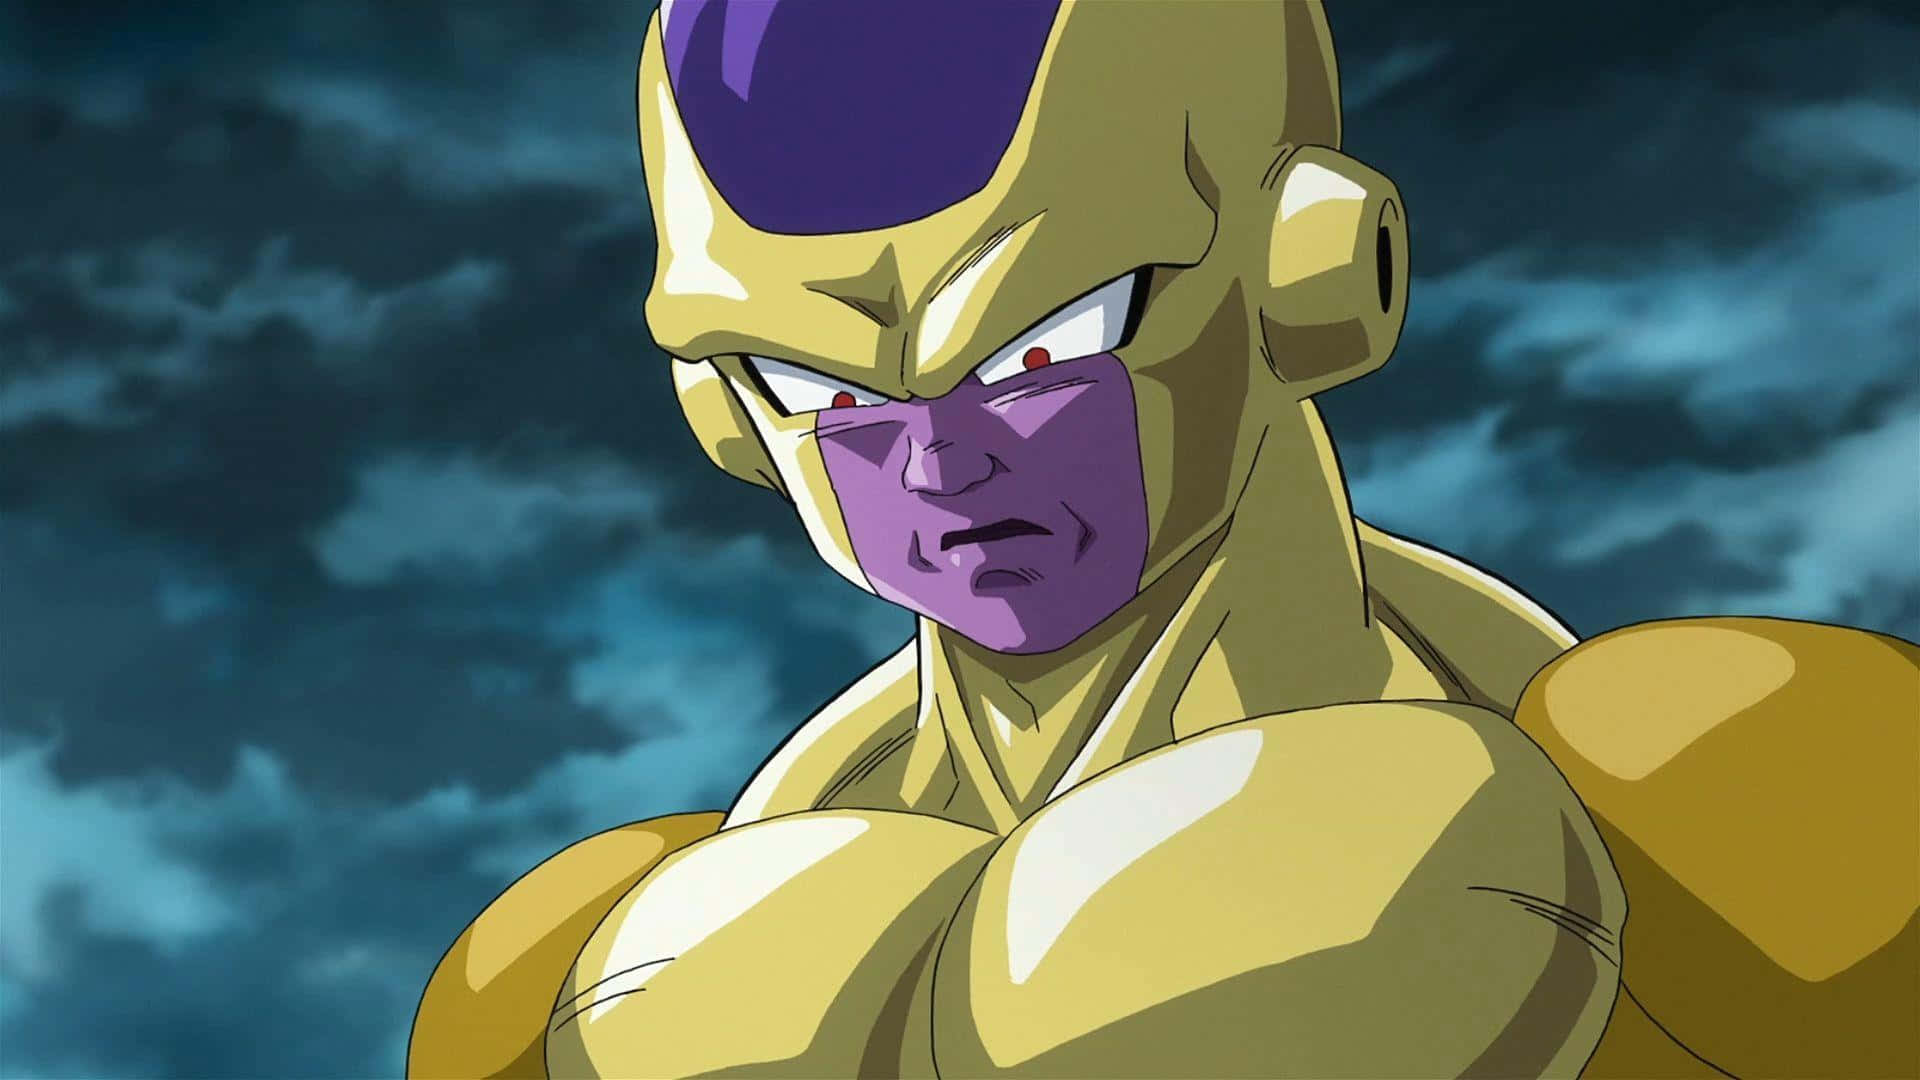 Download The Fierce And Powerful Golden Frieza Wallpaper | Wallpapers.com